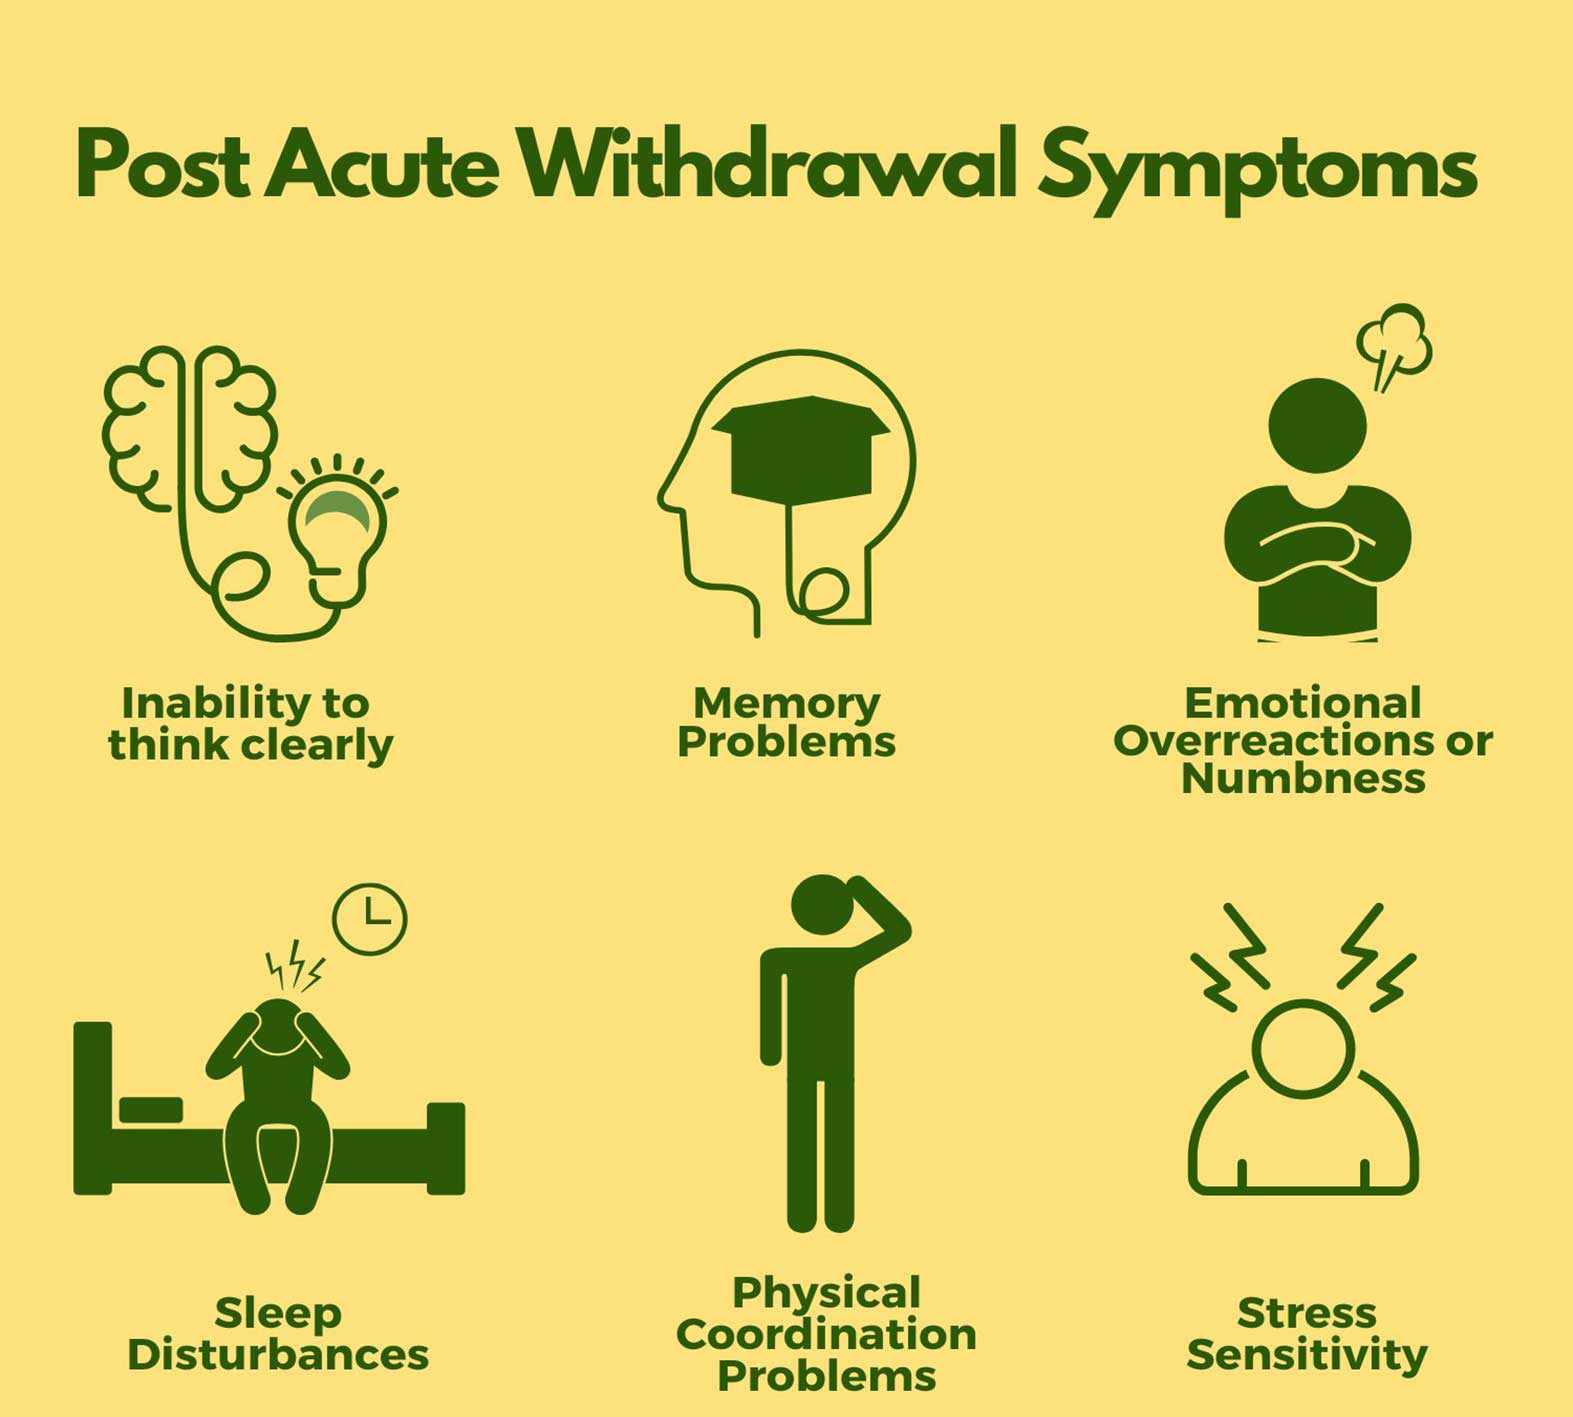 Post-Acute Withdrawal Syndrome (PAWS): Symptoms, Treatment & Types